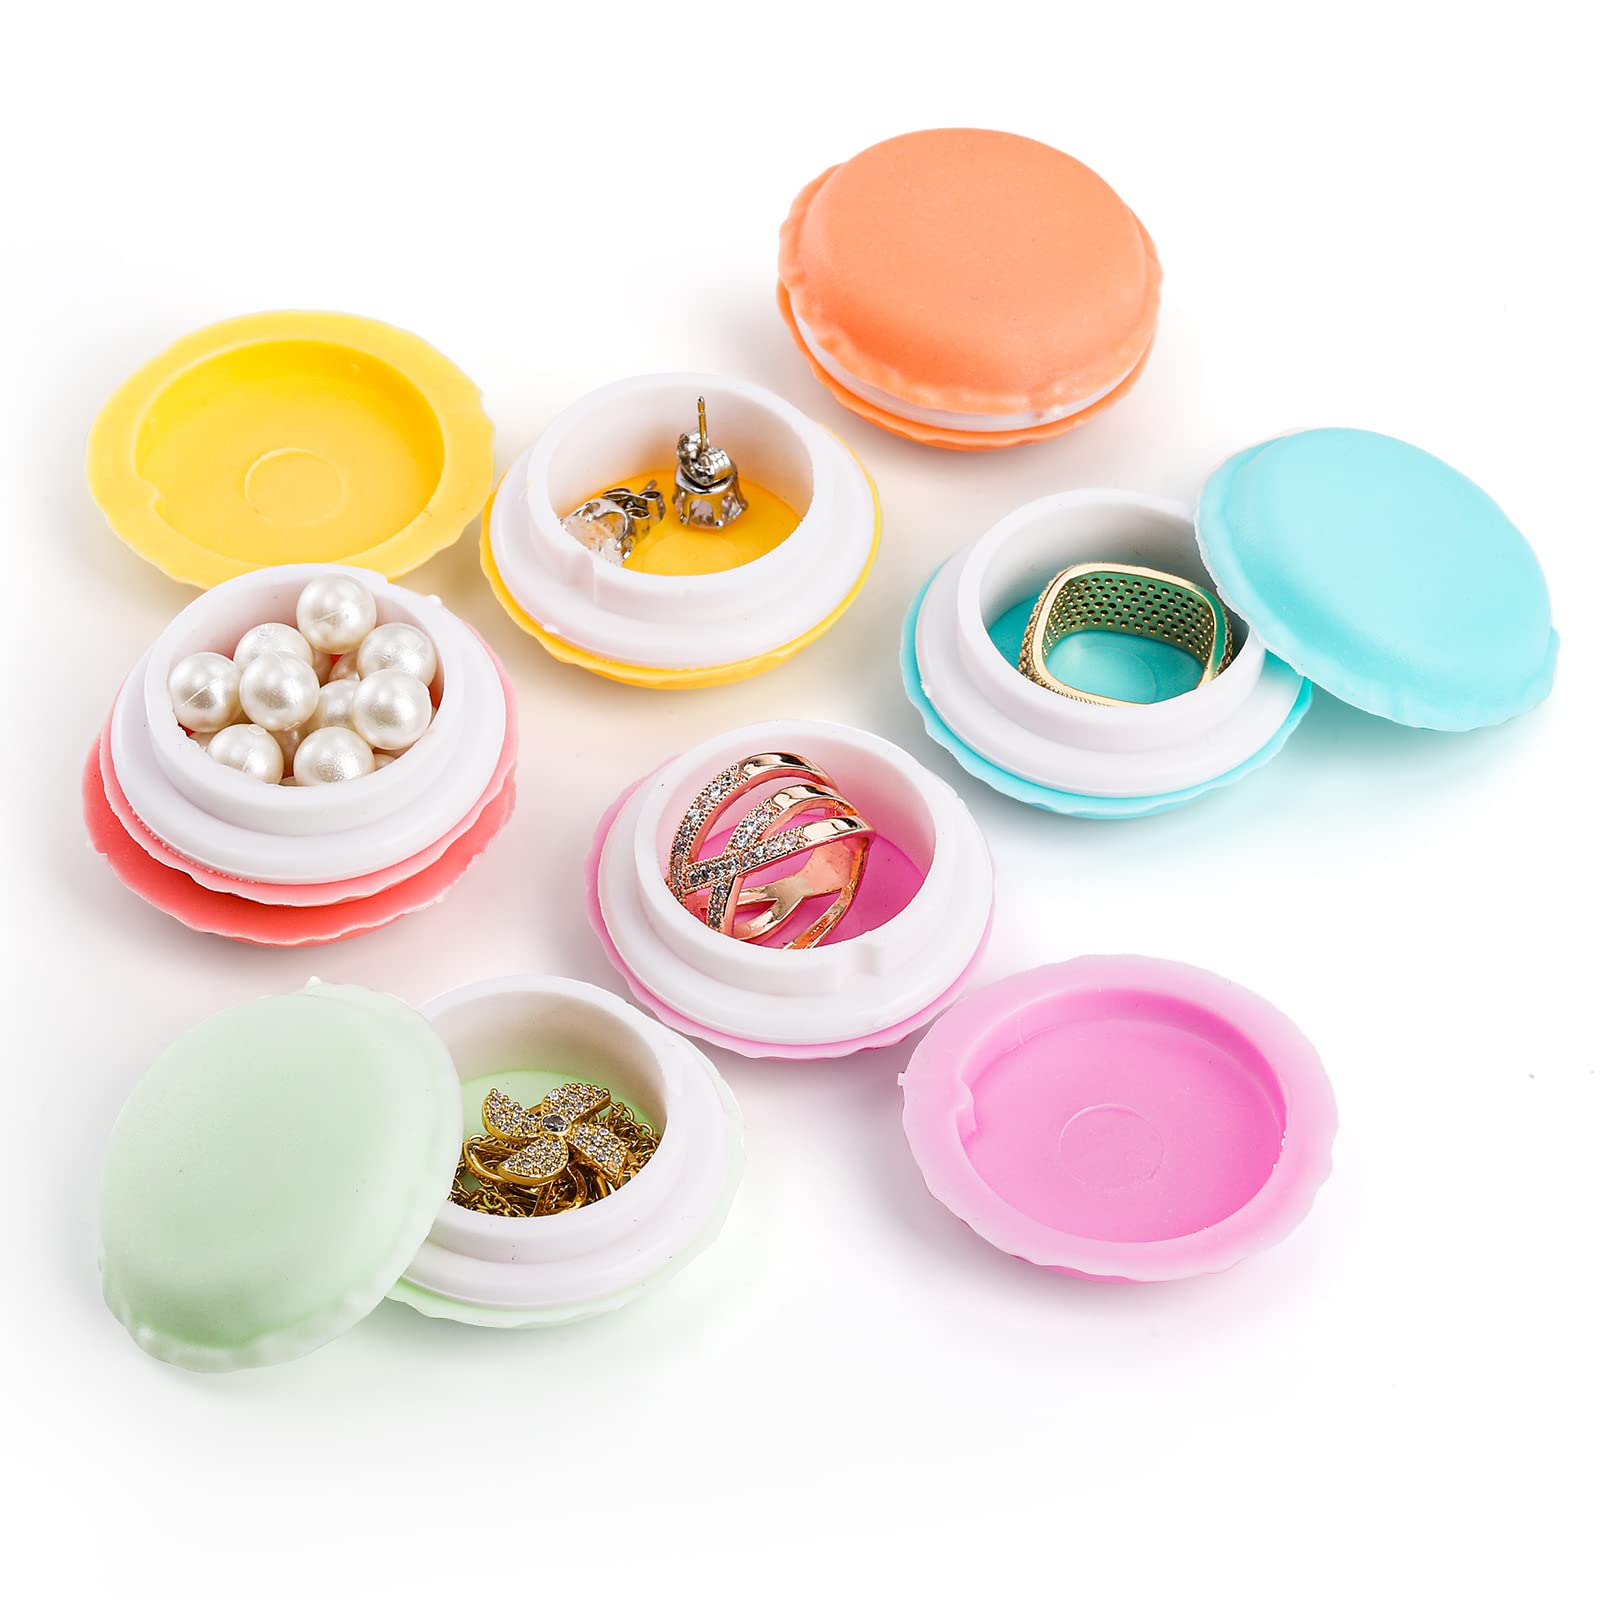 Elsjoy 54 Pack Mini Macaron Storage Boxes, Macaron Jewelry Storage Cases Cute Macaron Pill Boxes, Colorful Macaron Shaped Containers Trinket Boxes for Earring, Necklace, Pill, Travel